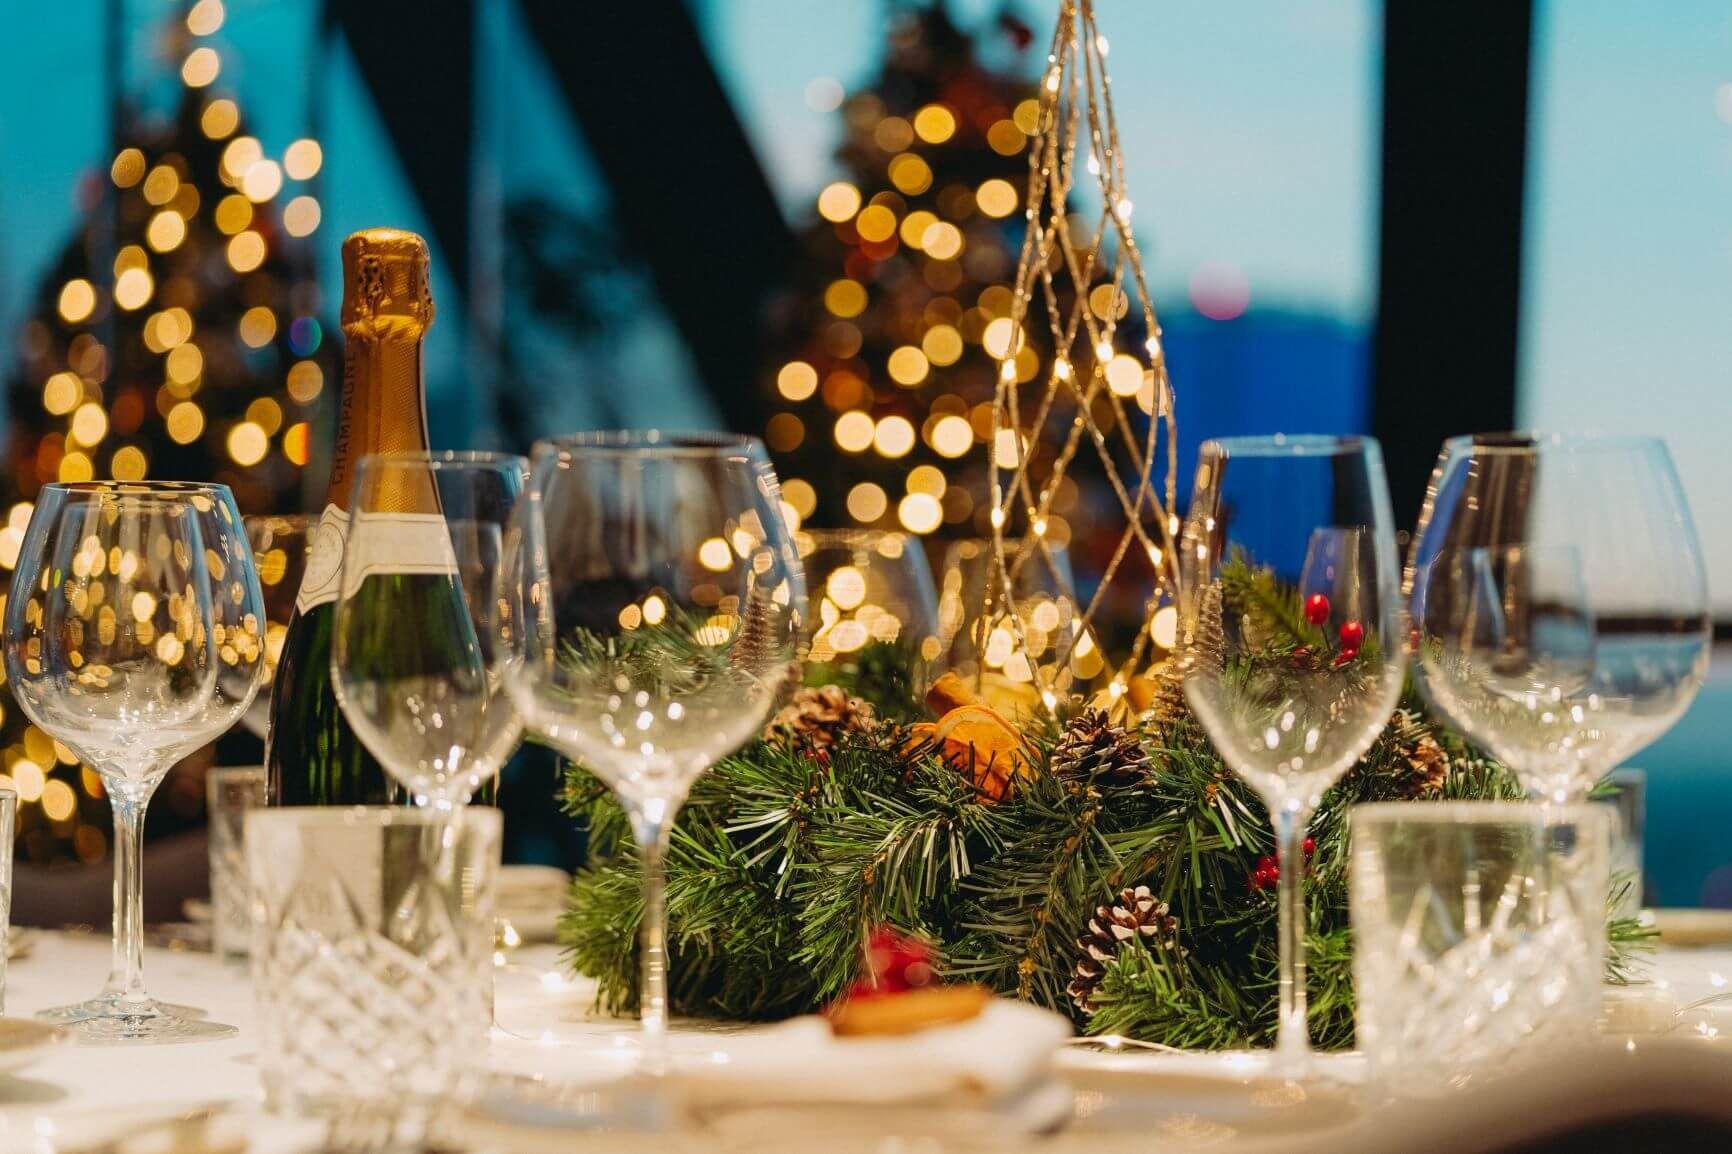 Hire Corporate Christmas parties in London venues